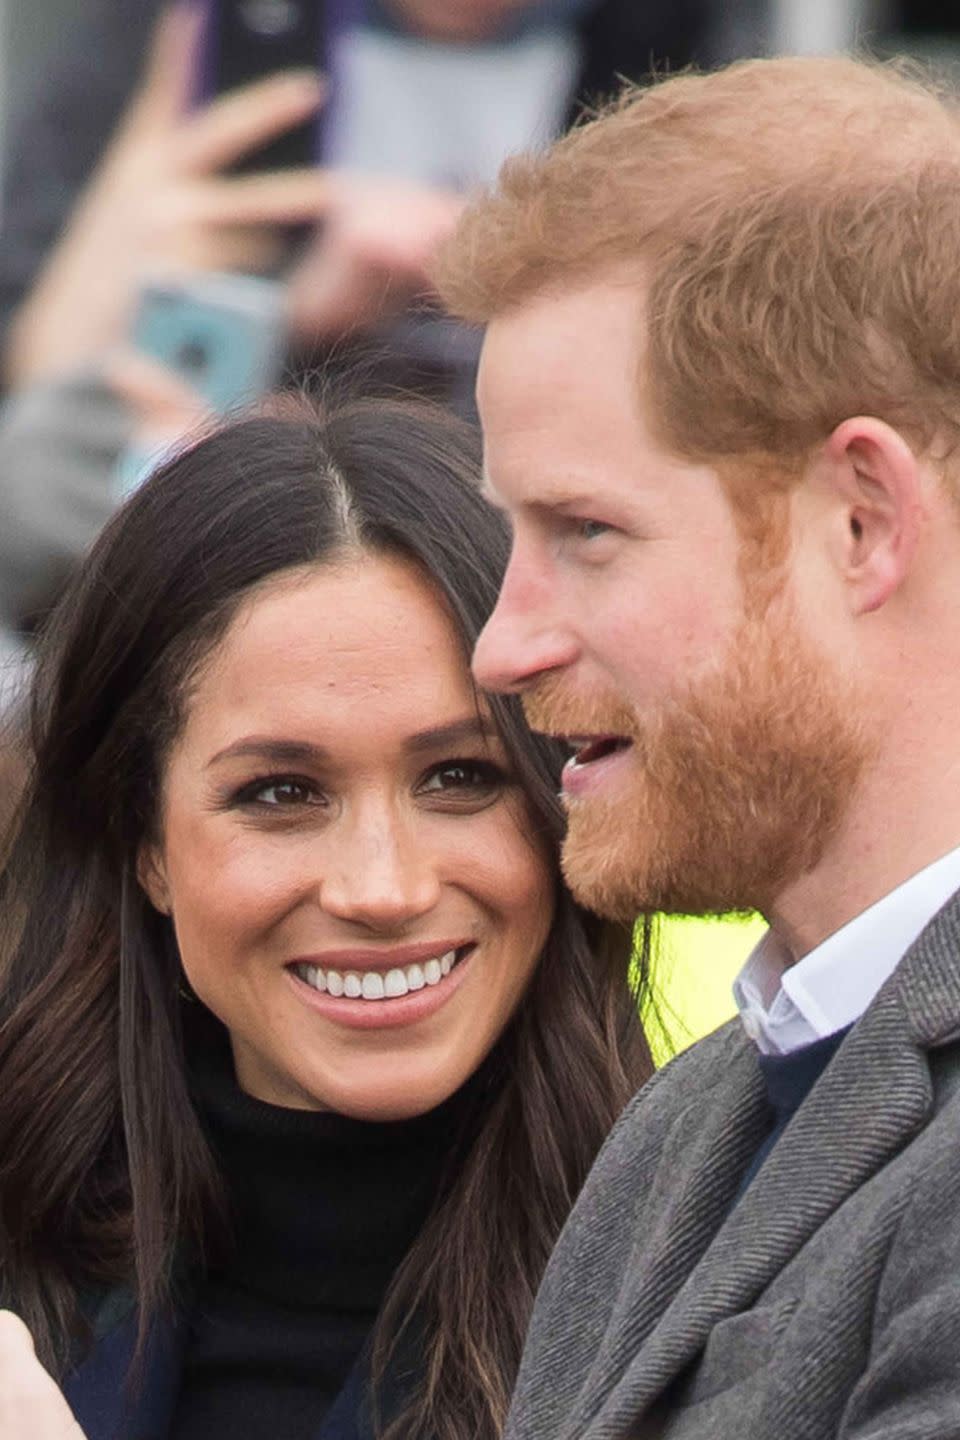 Meghan Markle smiles at Prince Harry during a visit to Edinburgh Castle in Scotland.